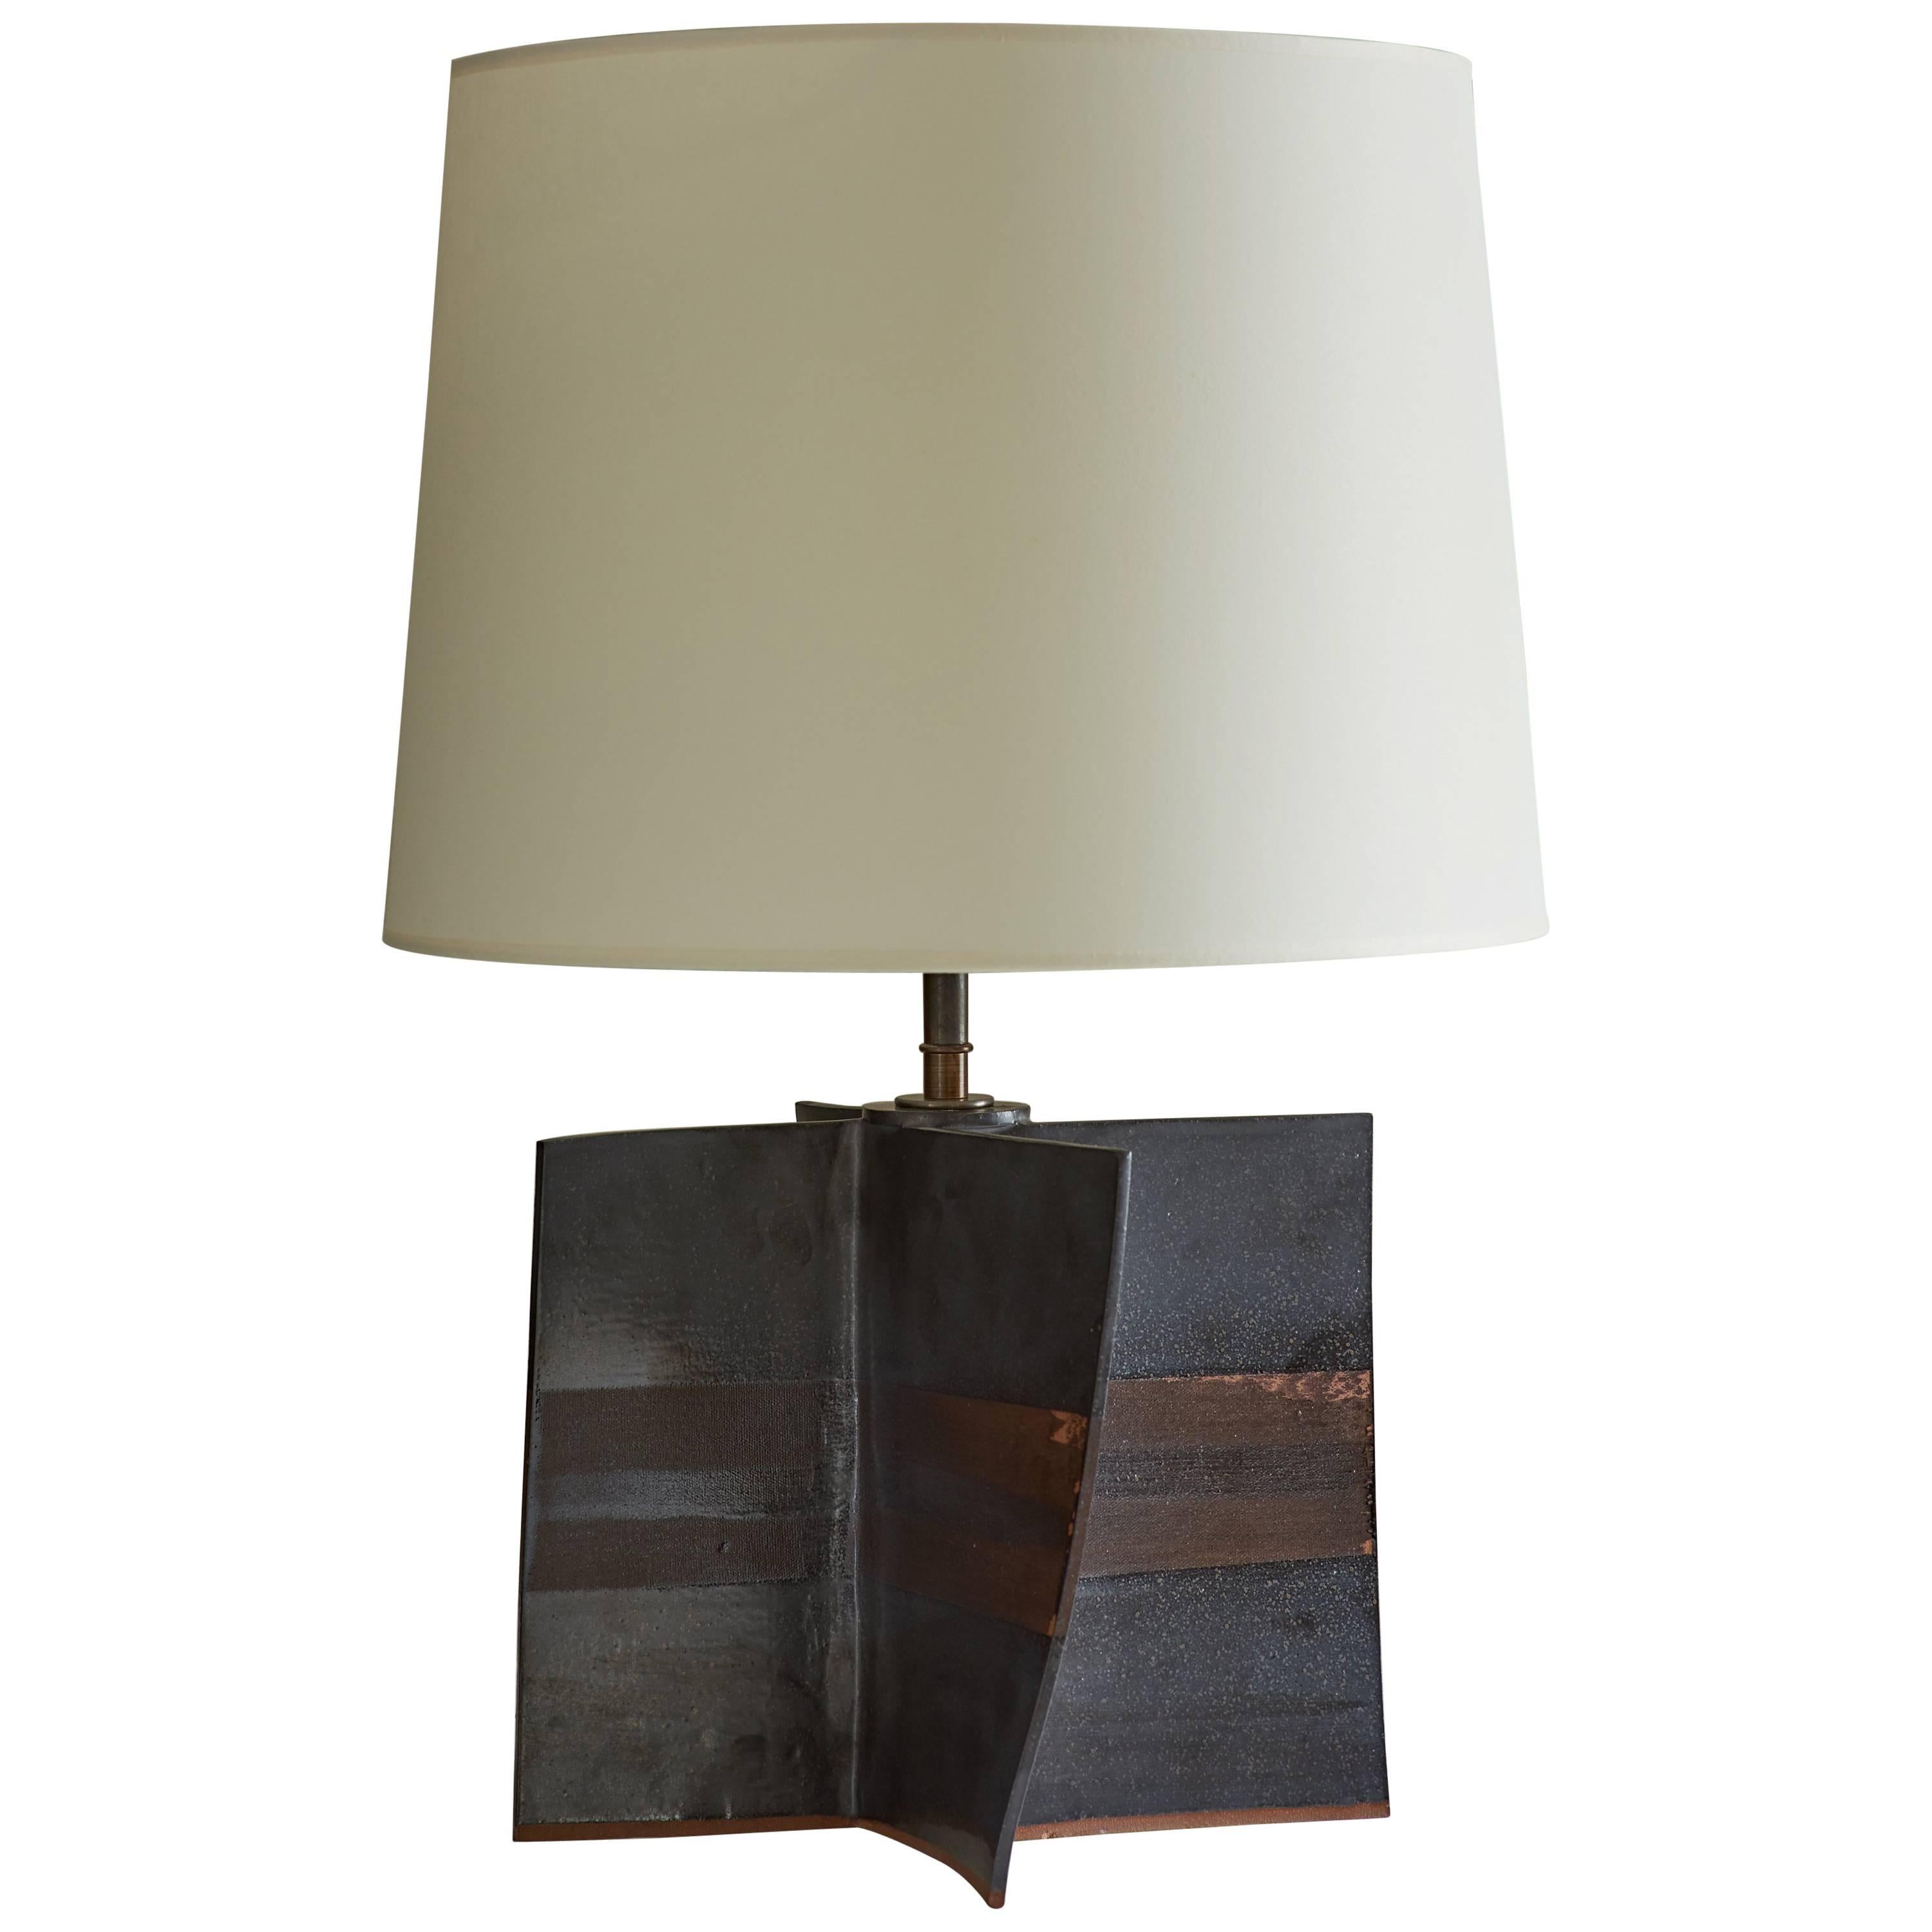 Ceramic Sculptural Table Lamp by Dumais Made